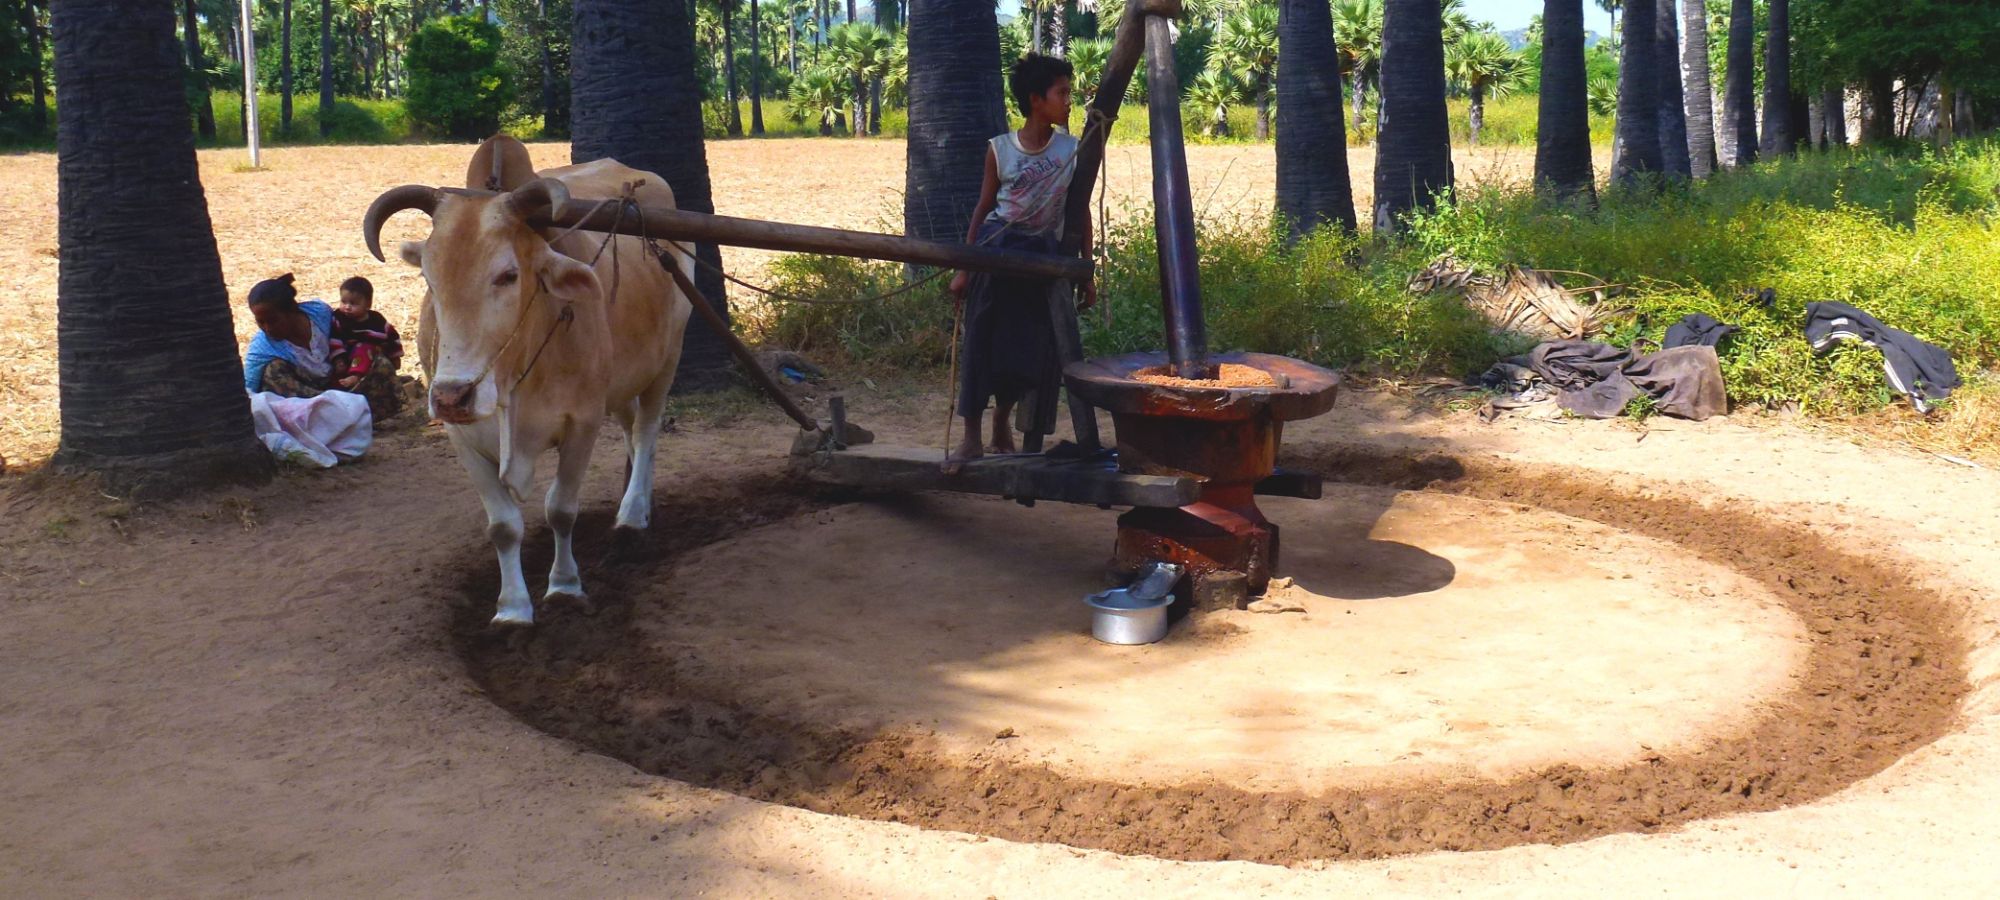 Traditional farming methods, help grind corn and rice